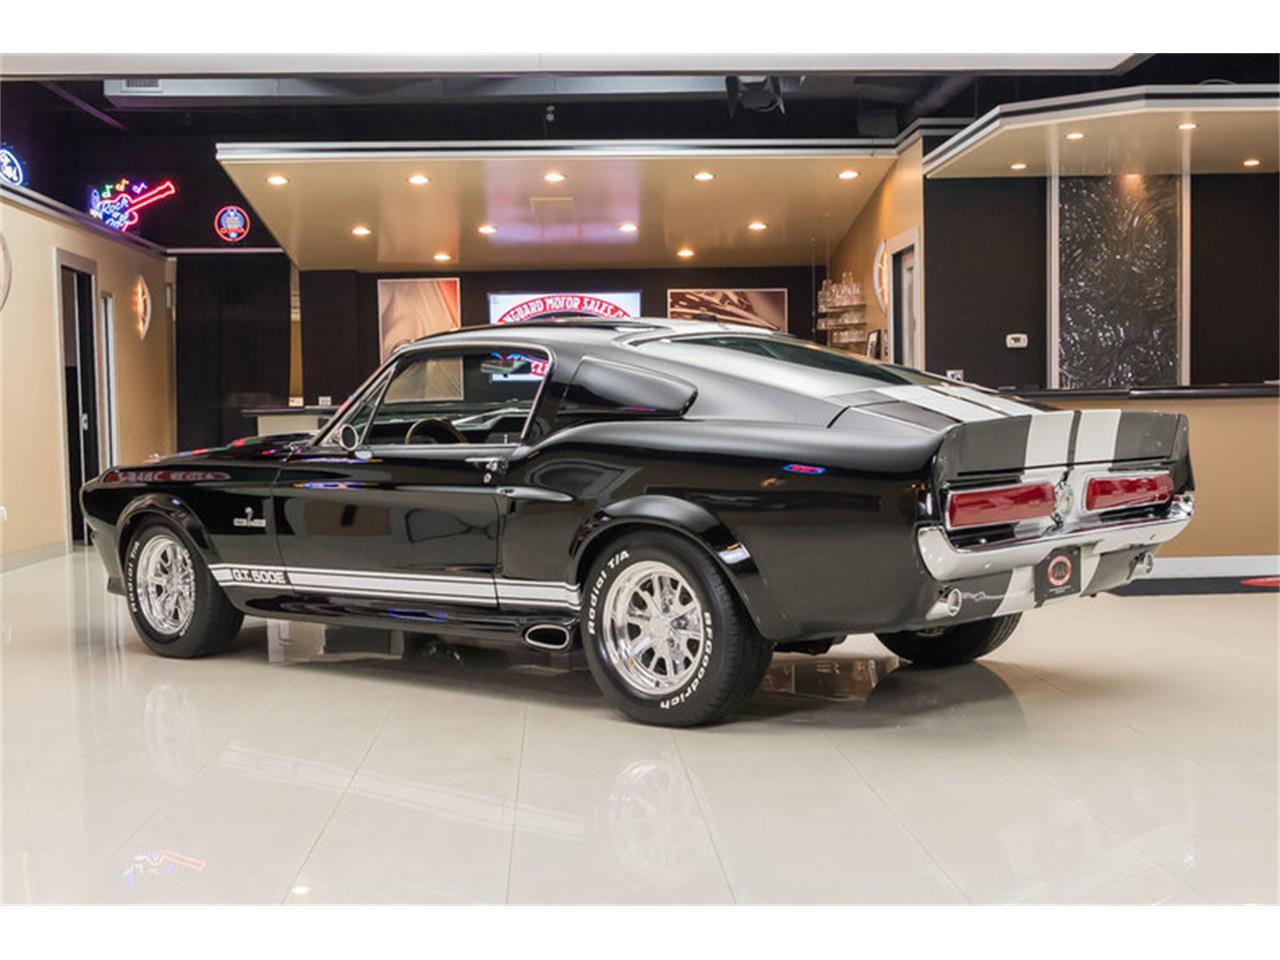 1968 Ford Mustang Fastback Black Eleanor for Sale | ClassicCars.com ...